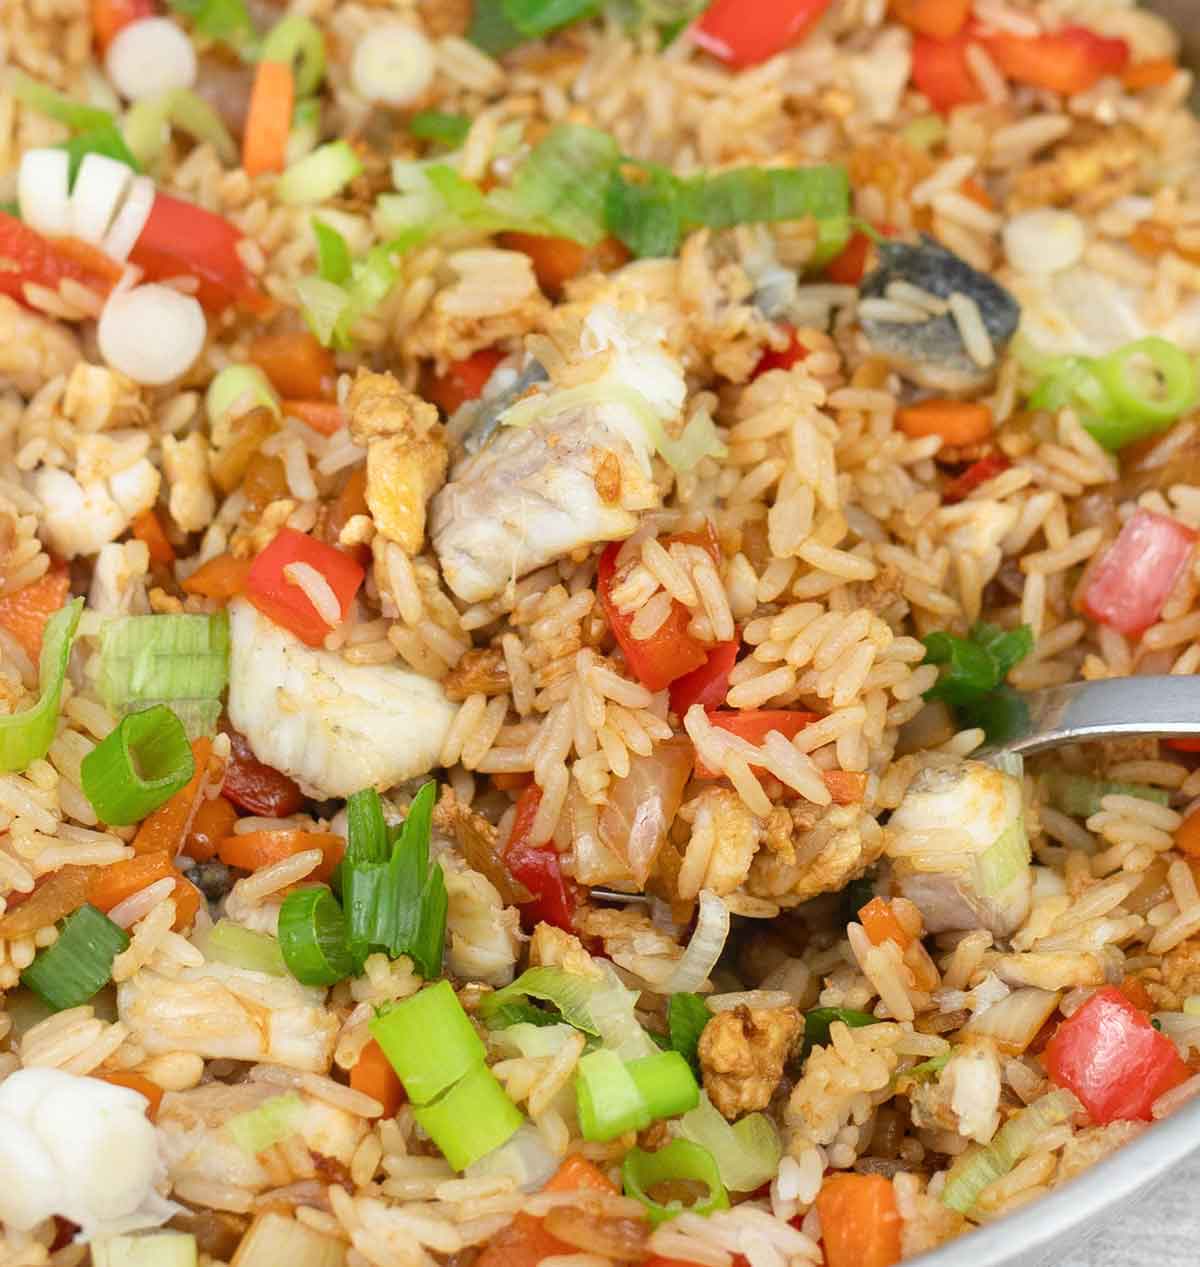 Fish rice with vegetables in a frying pan.